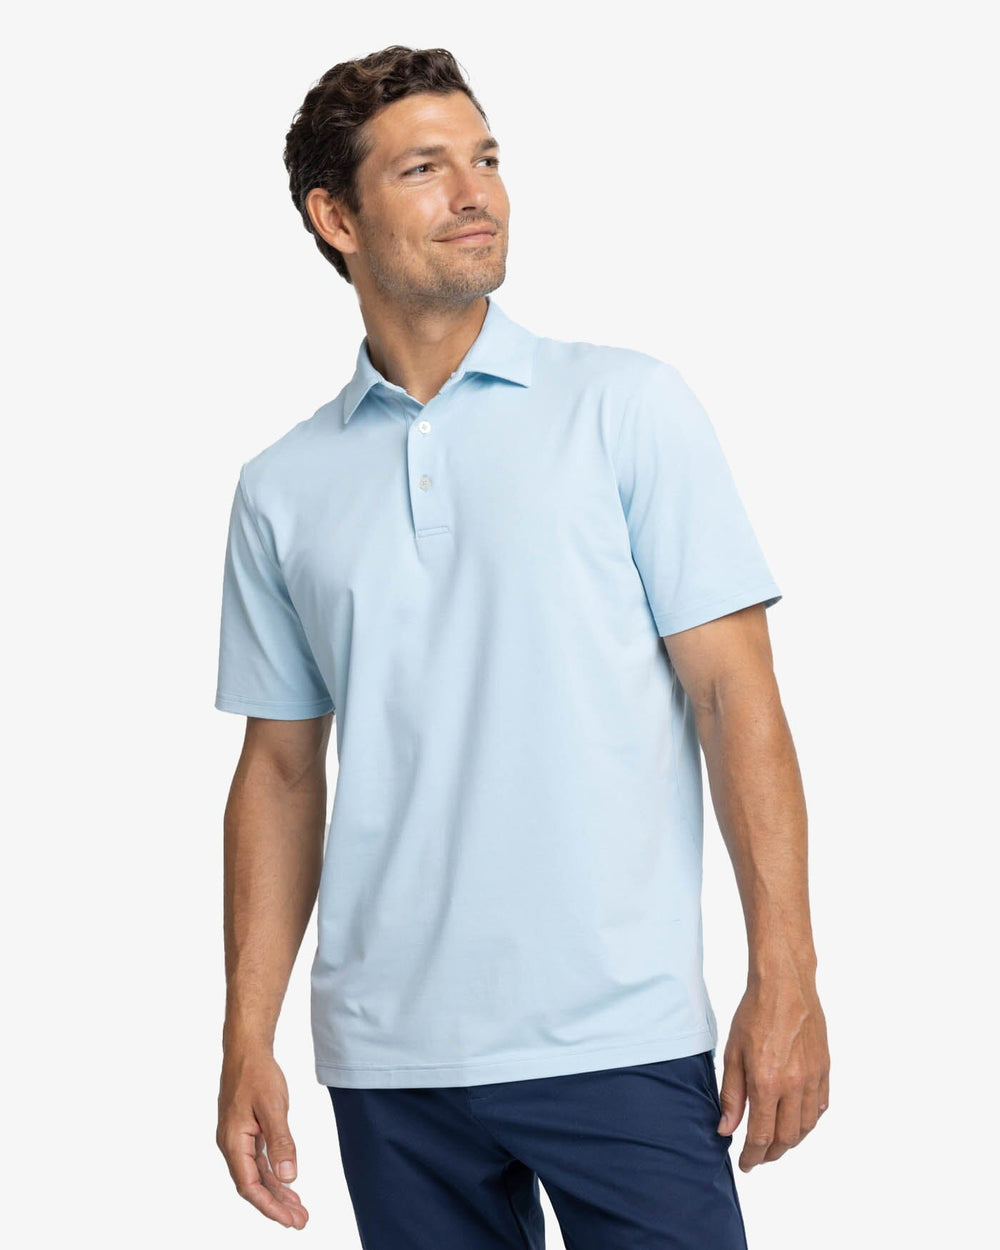 The front view of the Southern Tide brrr-eeze Heather Performance Polo Shirt by Southern Tide - Heather Dream Blue